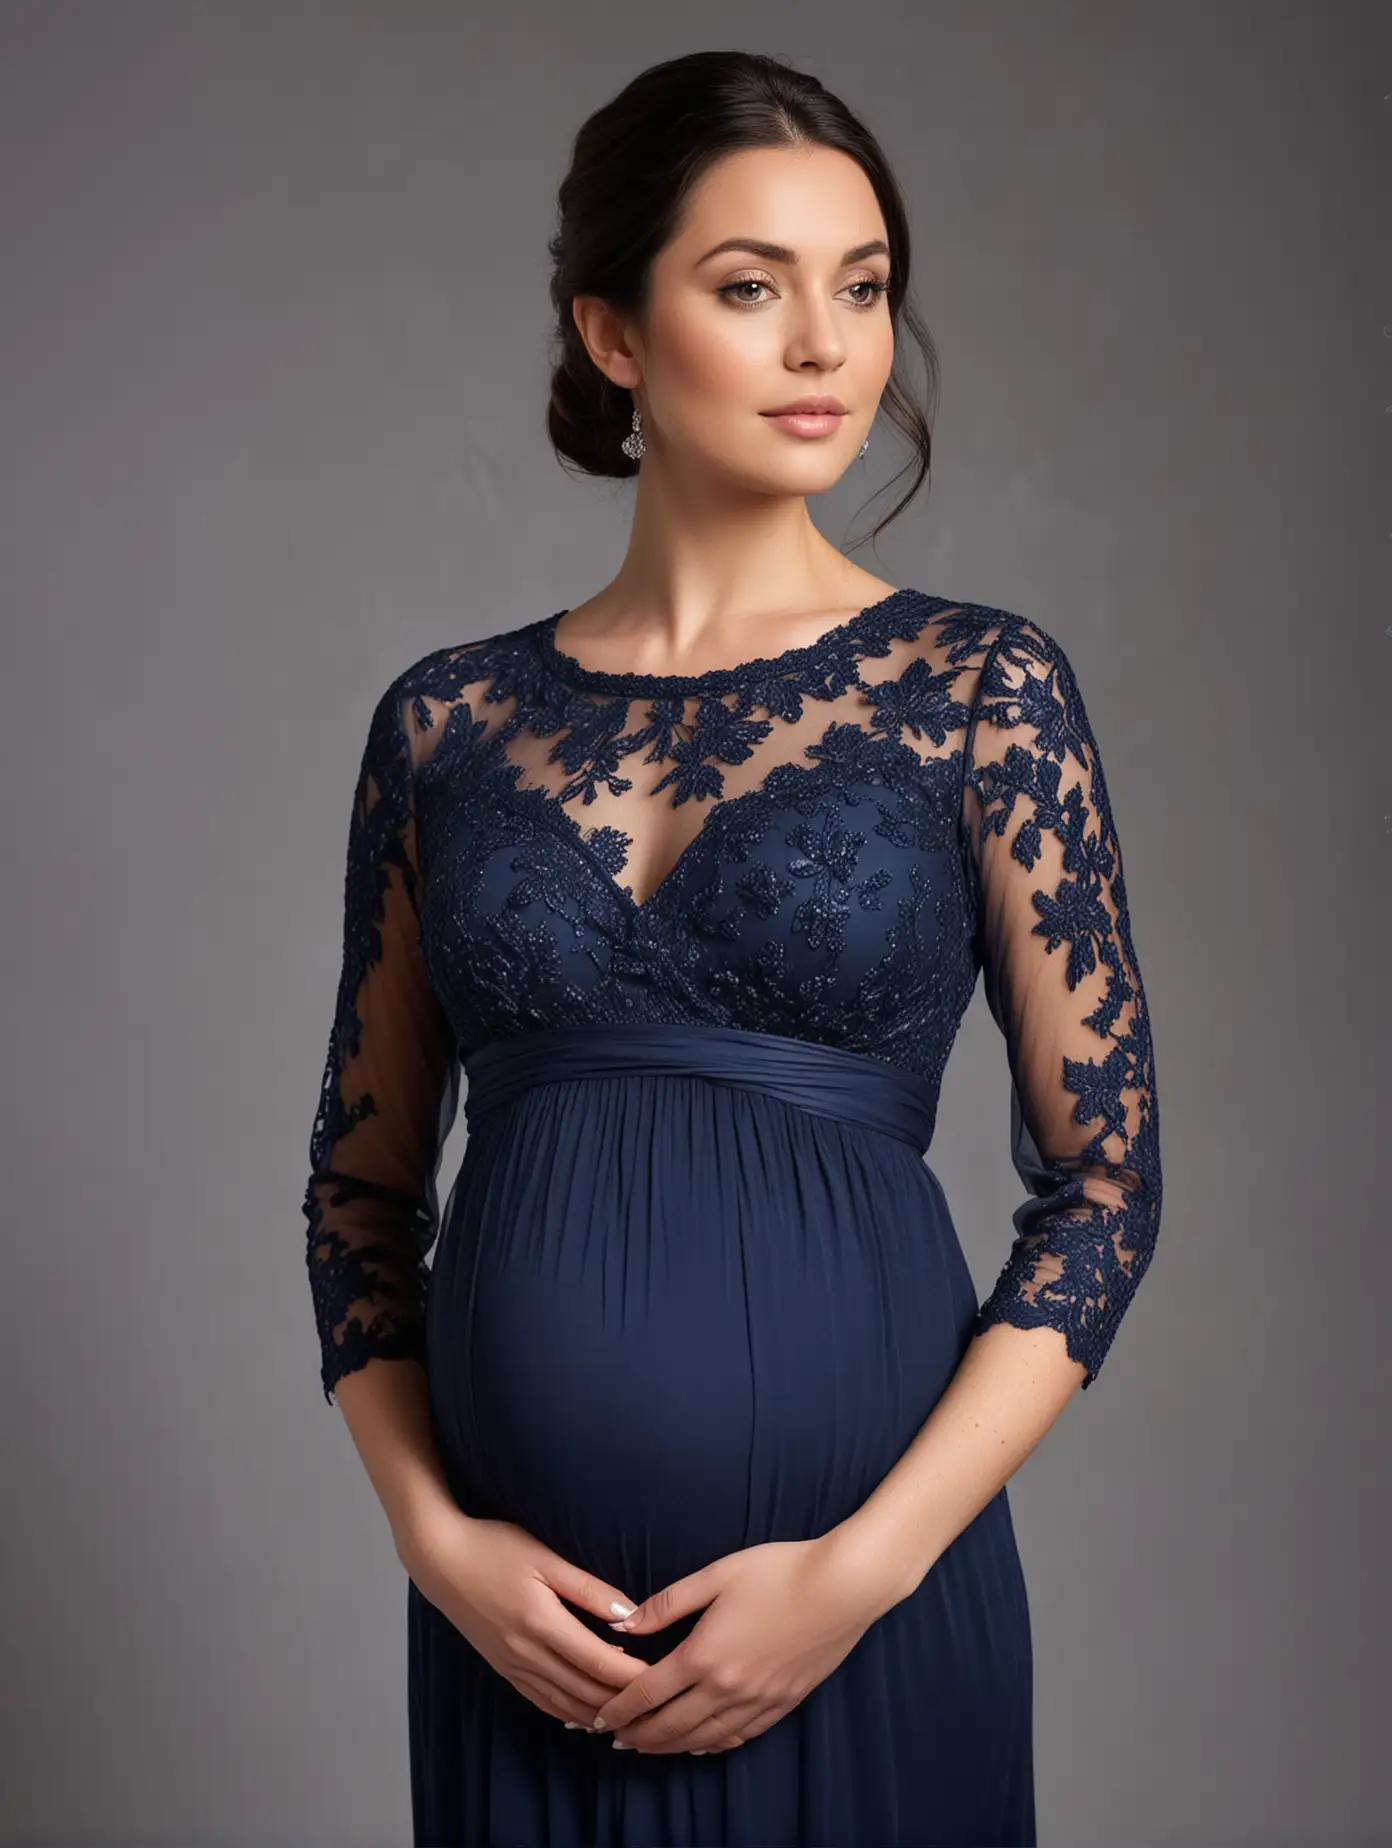 A beautiful pregnant woman wearing a navy blue evening dress with sheer sleeves and a lace bodice is posing for the camera. Exquisite facial features，She has dark hair and is facing forward. The gown also covers her belly. The fabric looks very soft and comfortable to wear. The background color should be neutral or light gray